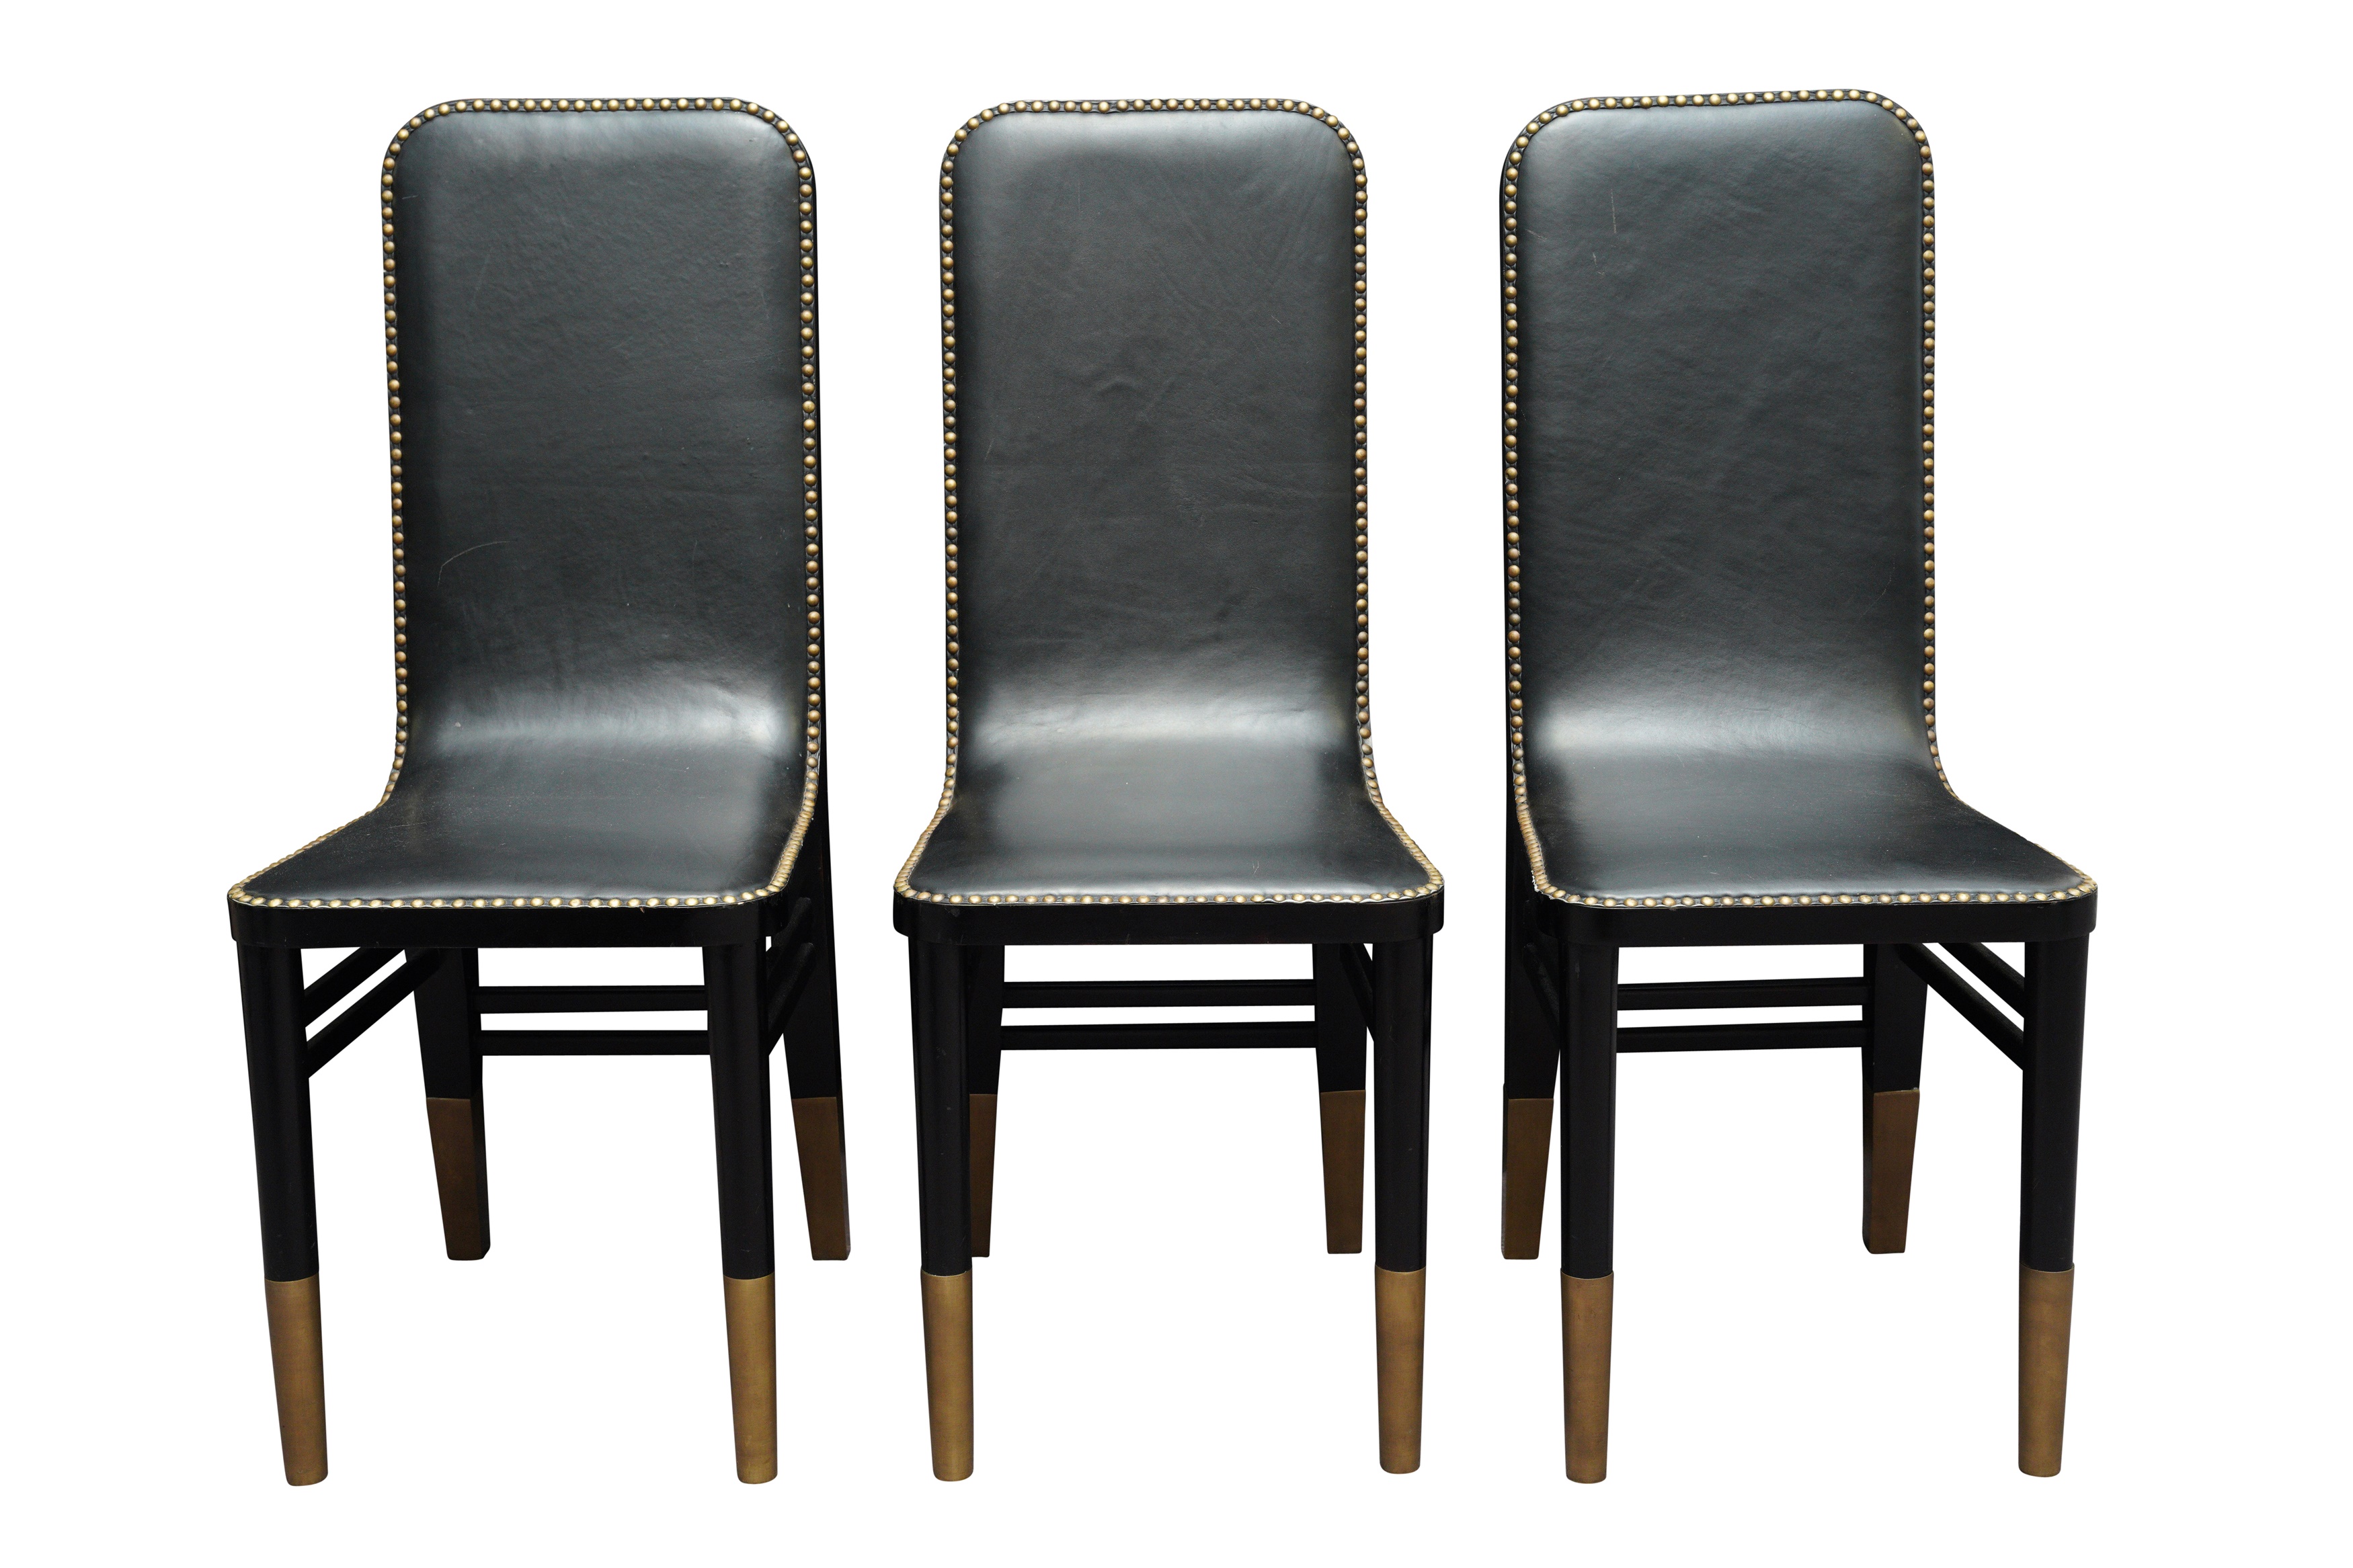 A SET OF PAOLO MOSCHINO 'URBAN' DINING CHAIRS  - Image 5 of 6